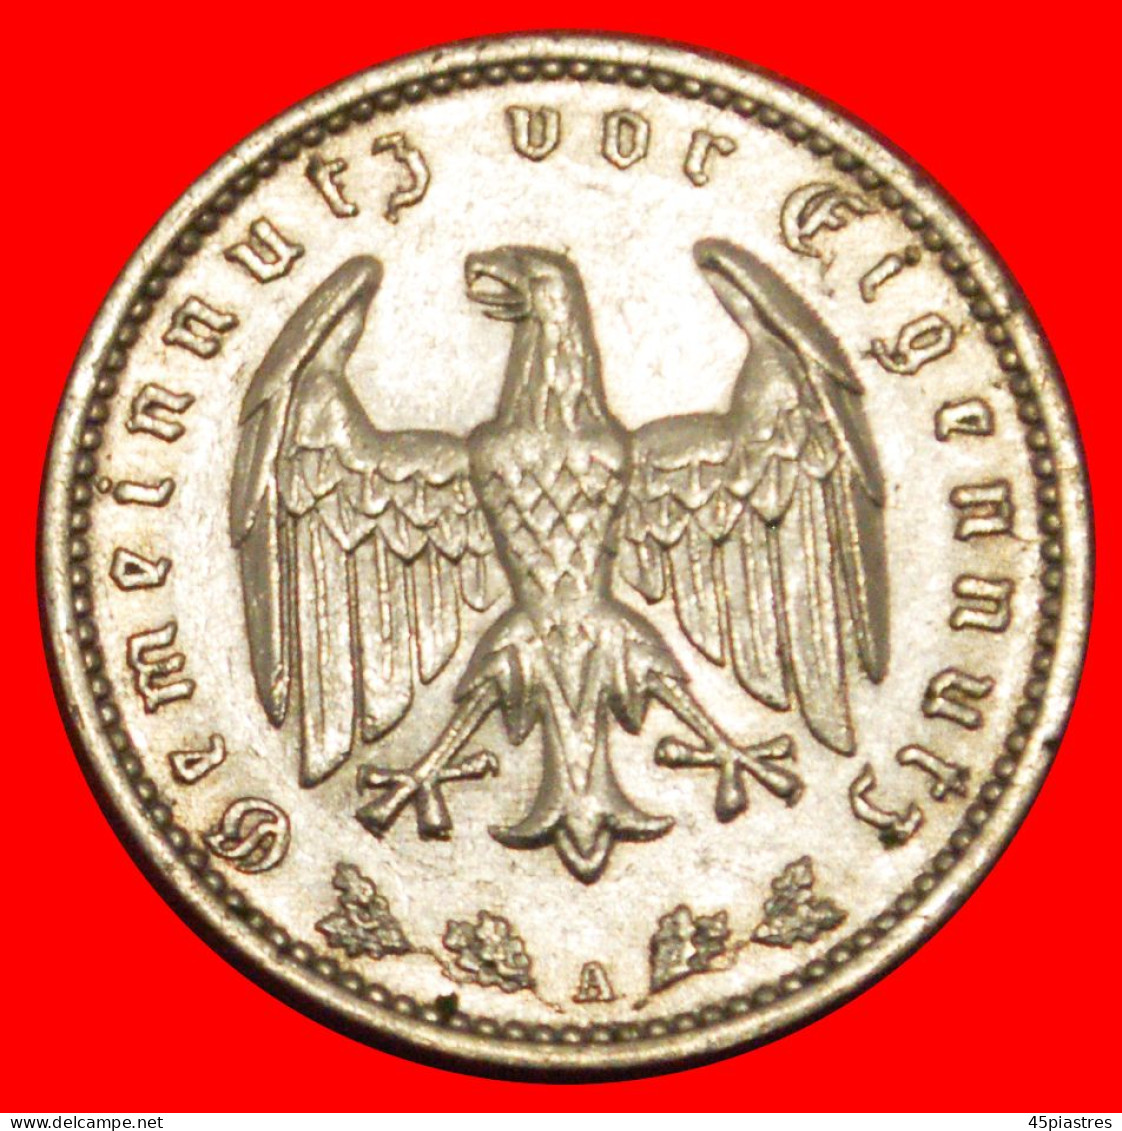 * NO SWASTIKA (1933-1939): GERMANY  1 MARK 1933A UNCOMMON! THIRD REICH (1933-1945) · LOW START ·  NO RESERVE! - 1 Reichsmark